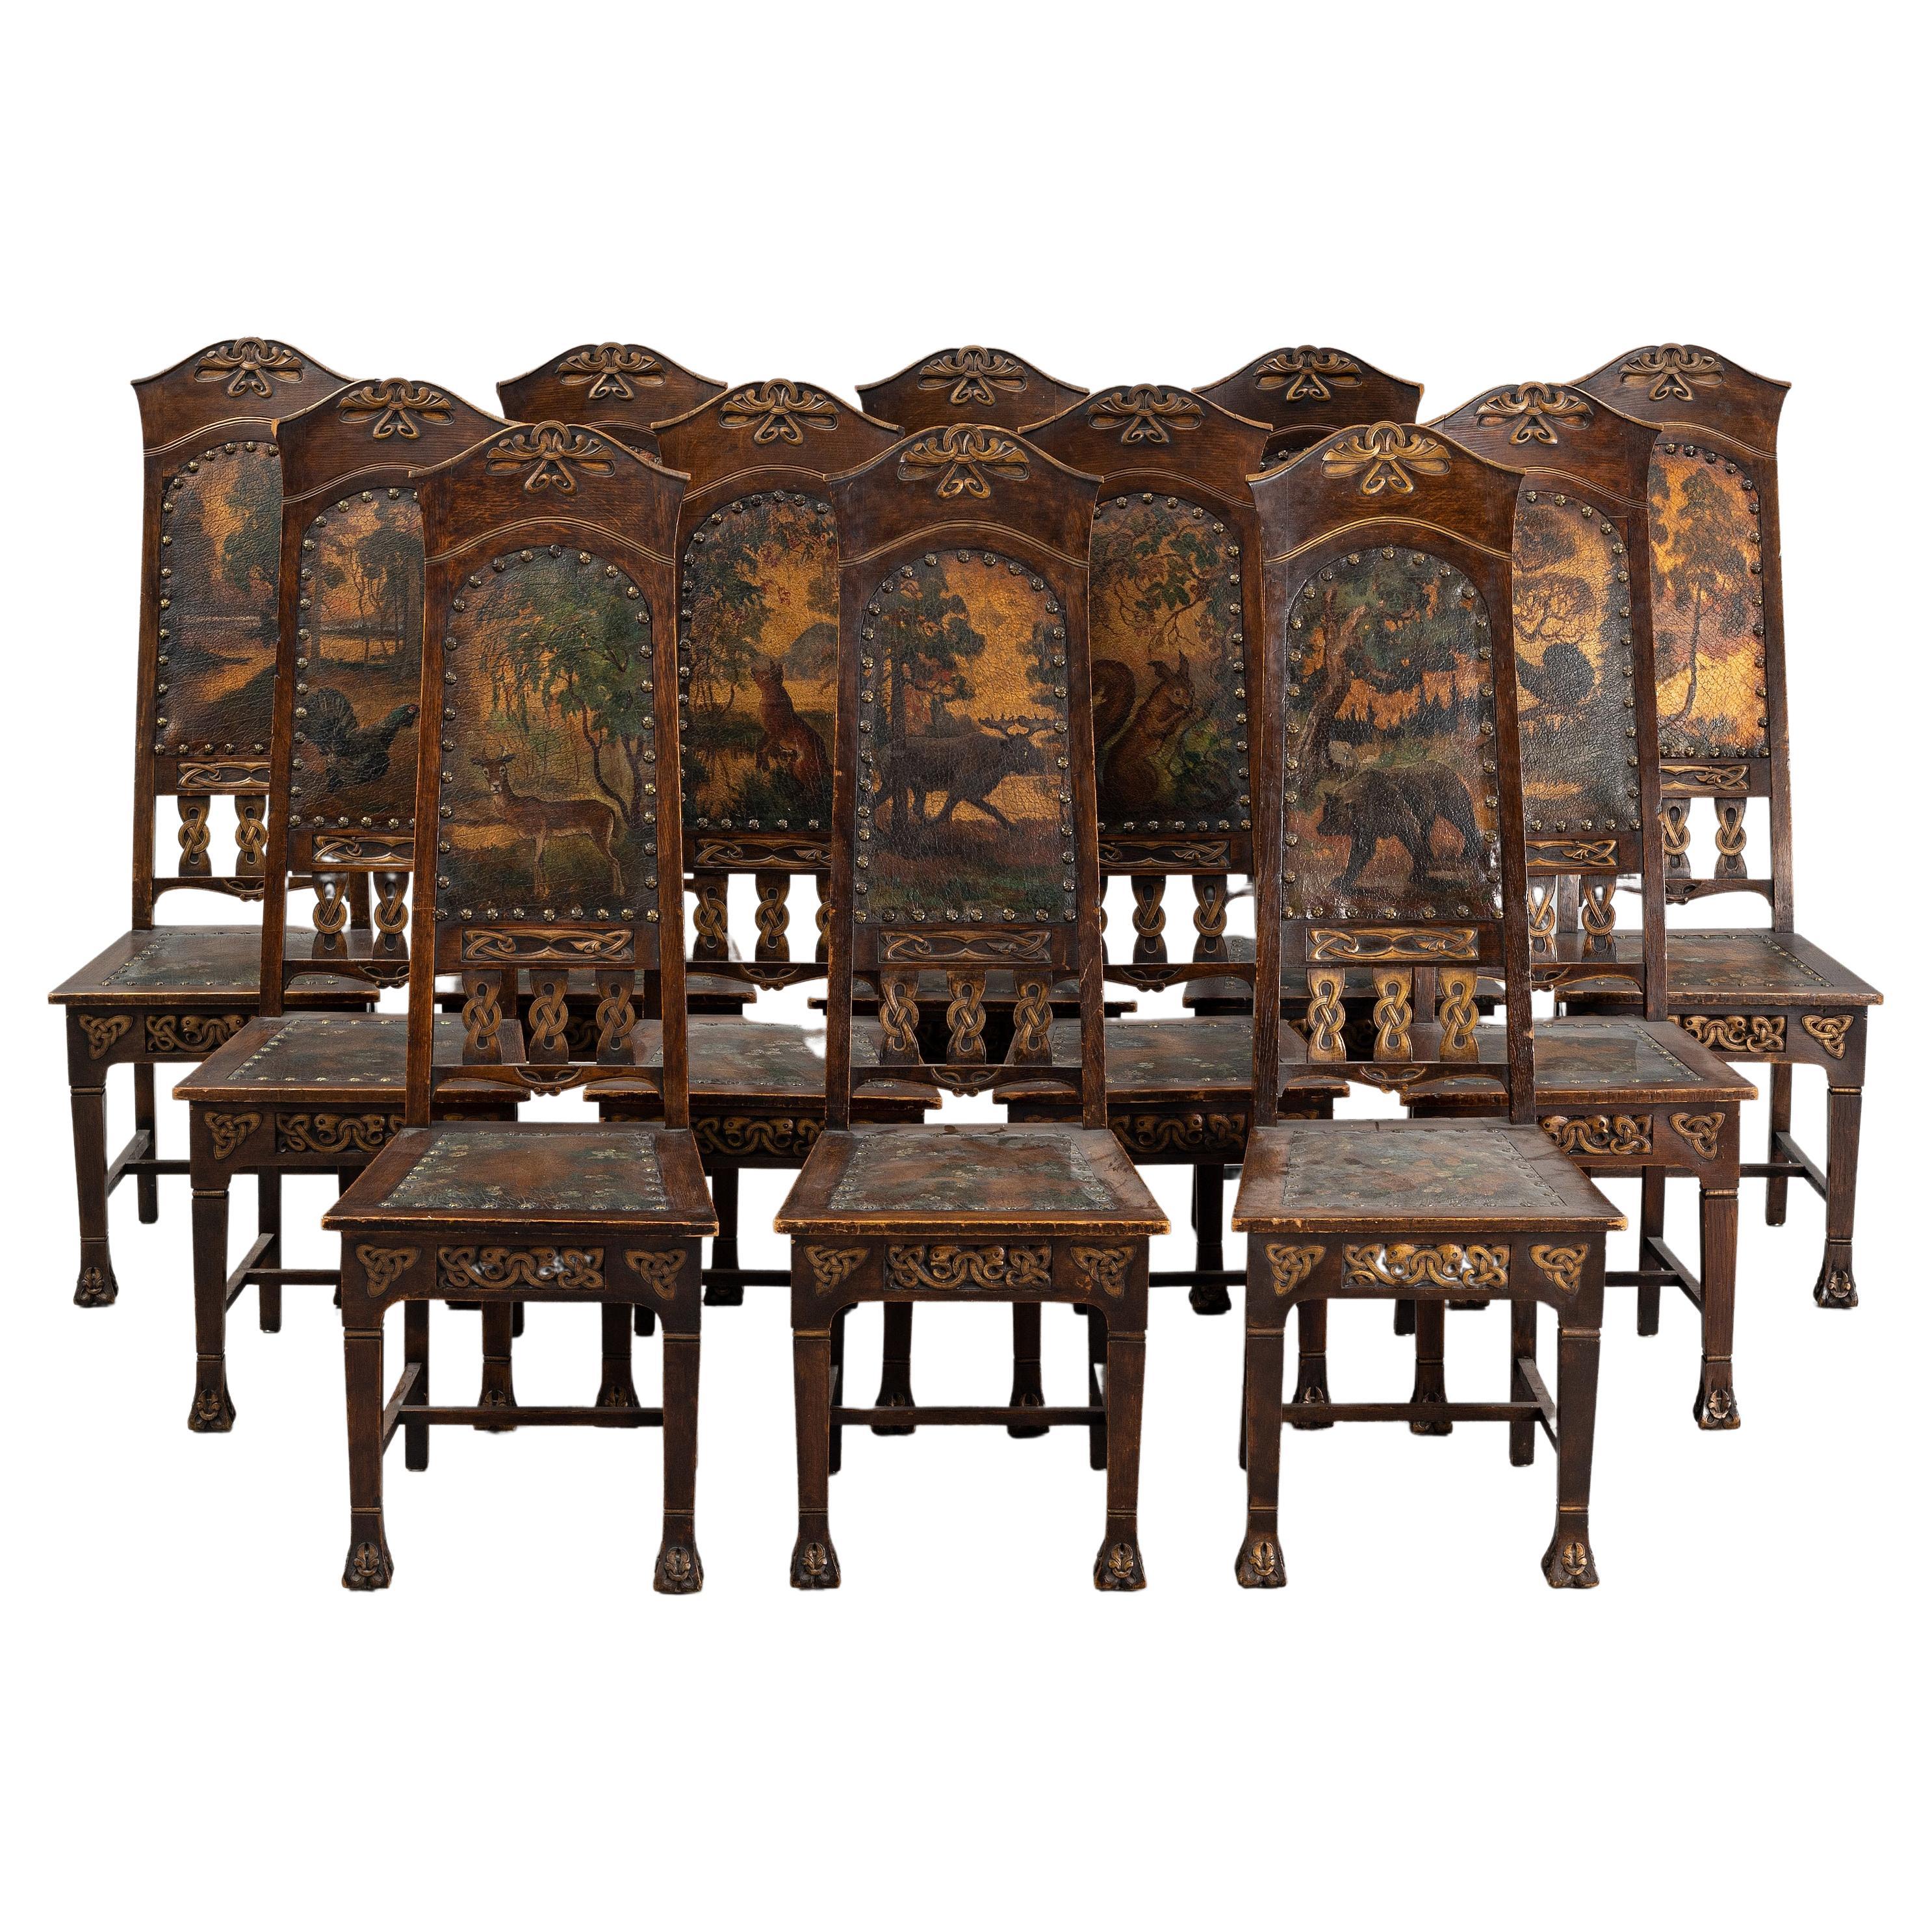 This is an extraordinary set of 12 Art Nouveaux dining chairs from Sweden, in solid oak, covered in hand-painted leather each one featuring a different animal in a natural setting on front and back. 
The leather is in excellent original condition